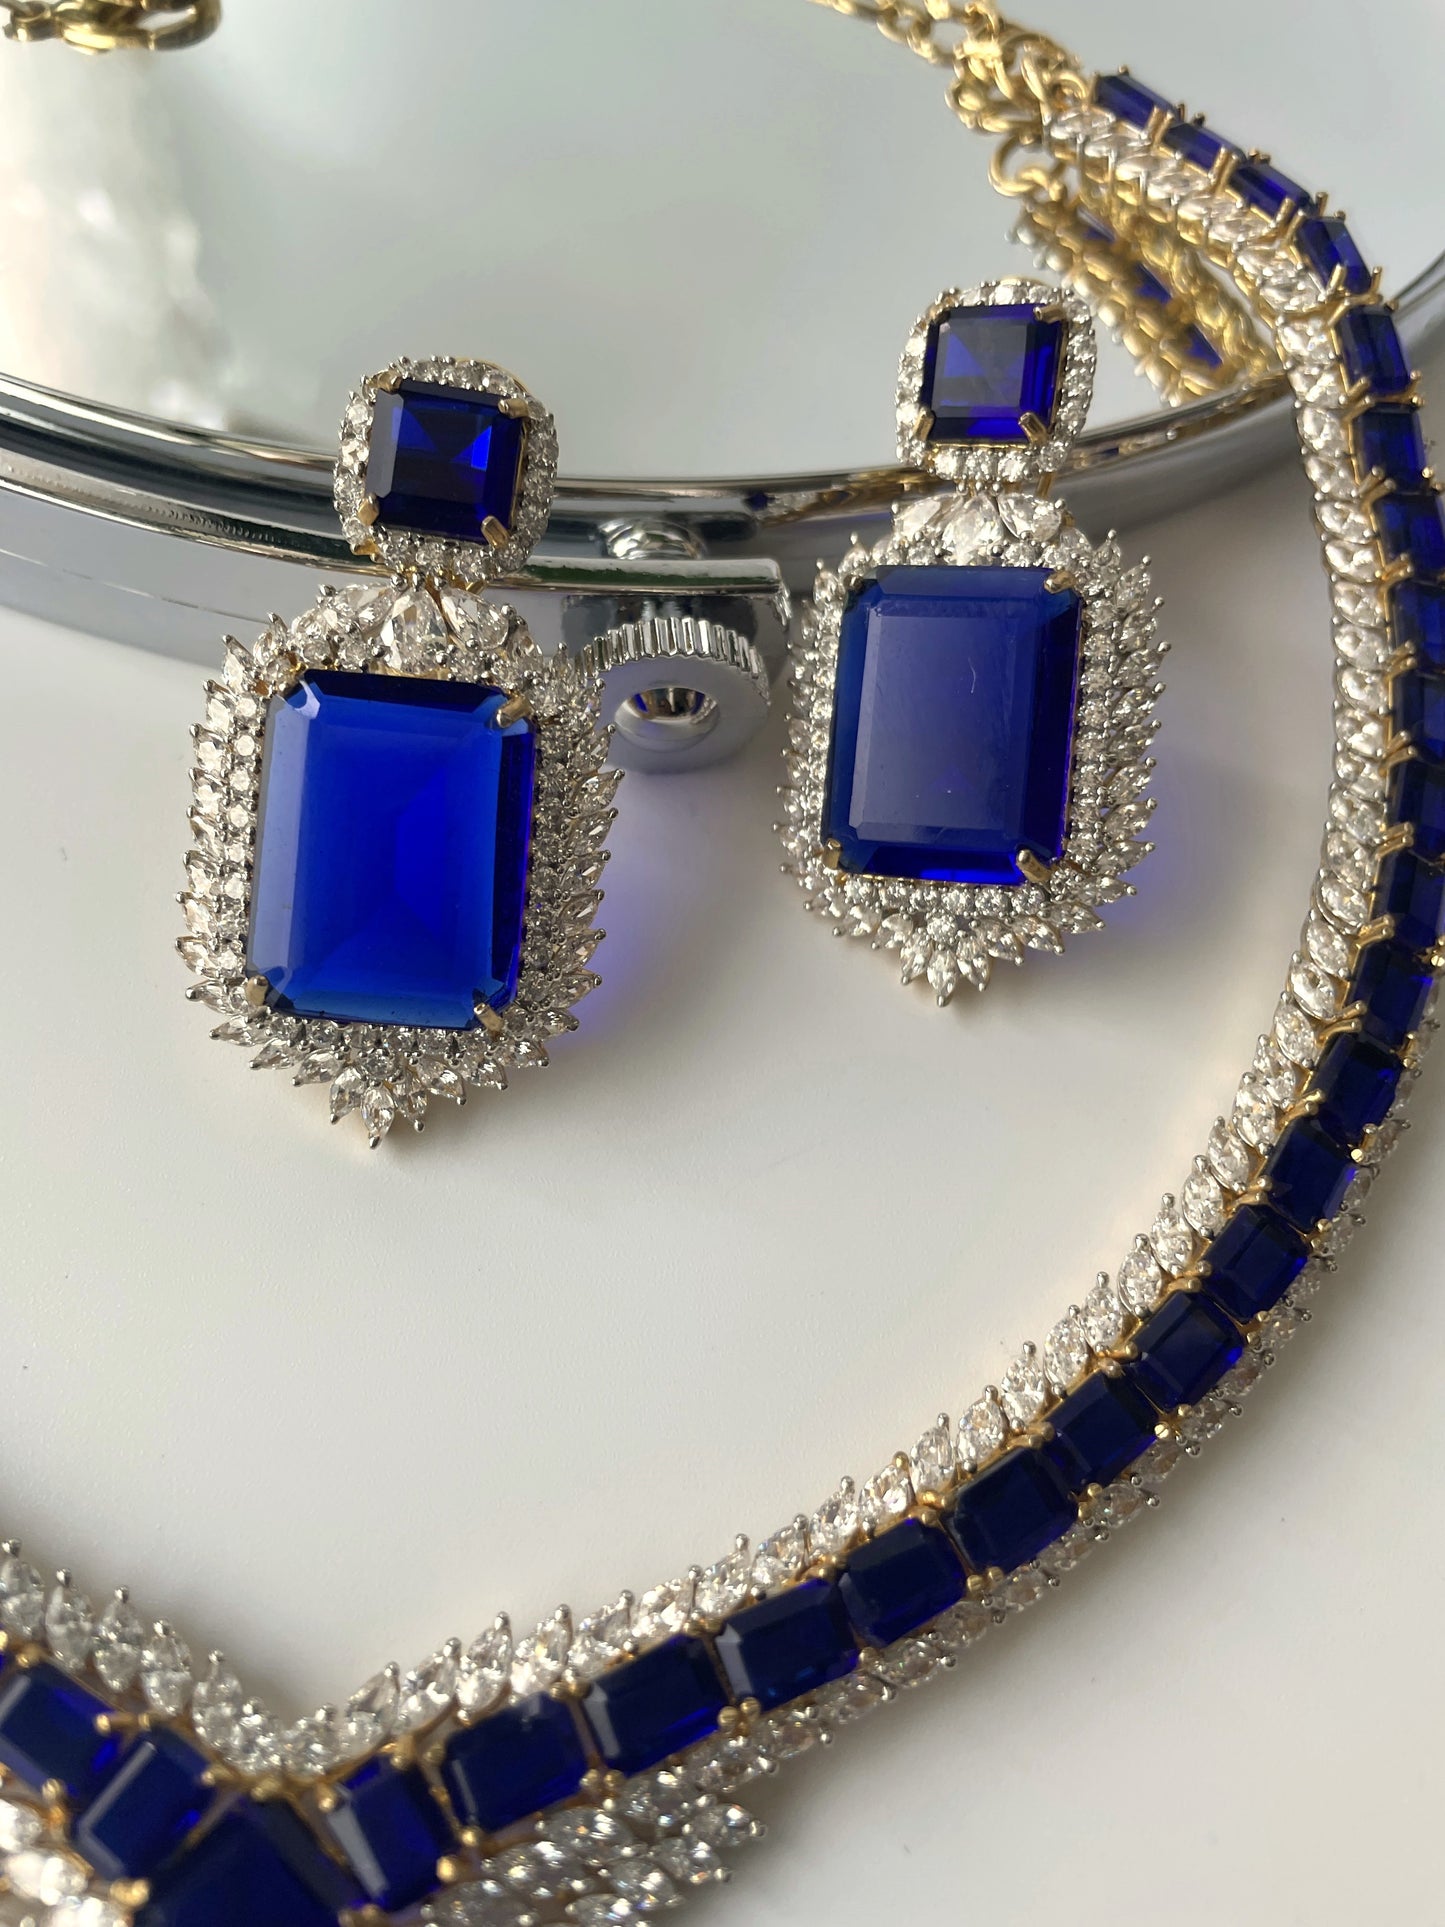 Crystal Studded Exquisite Necklace Set with Royal Blue Stone